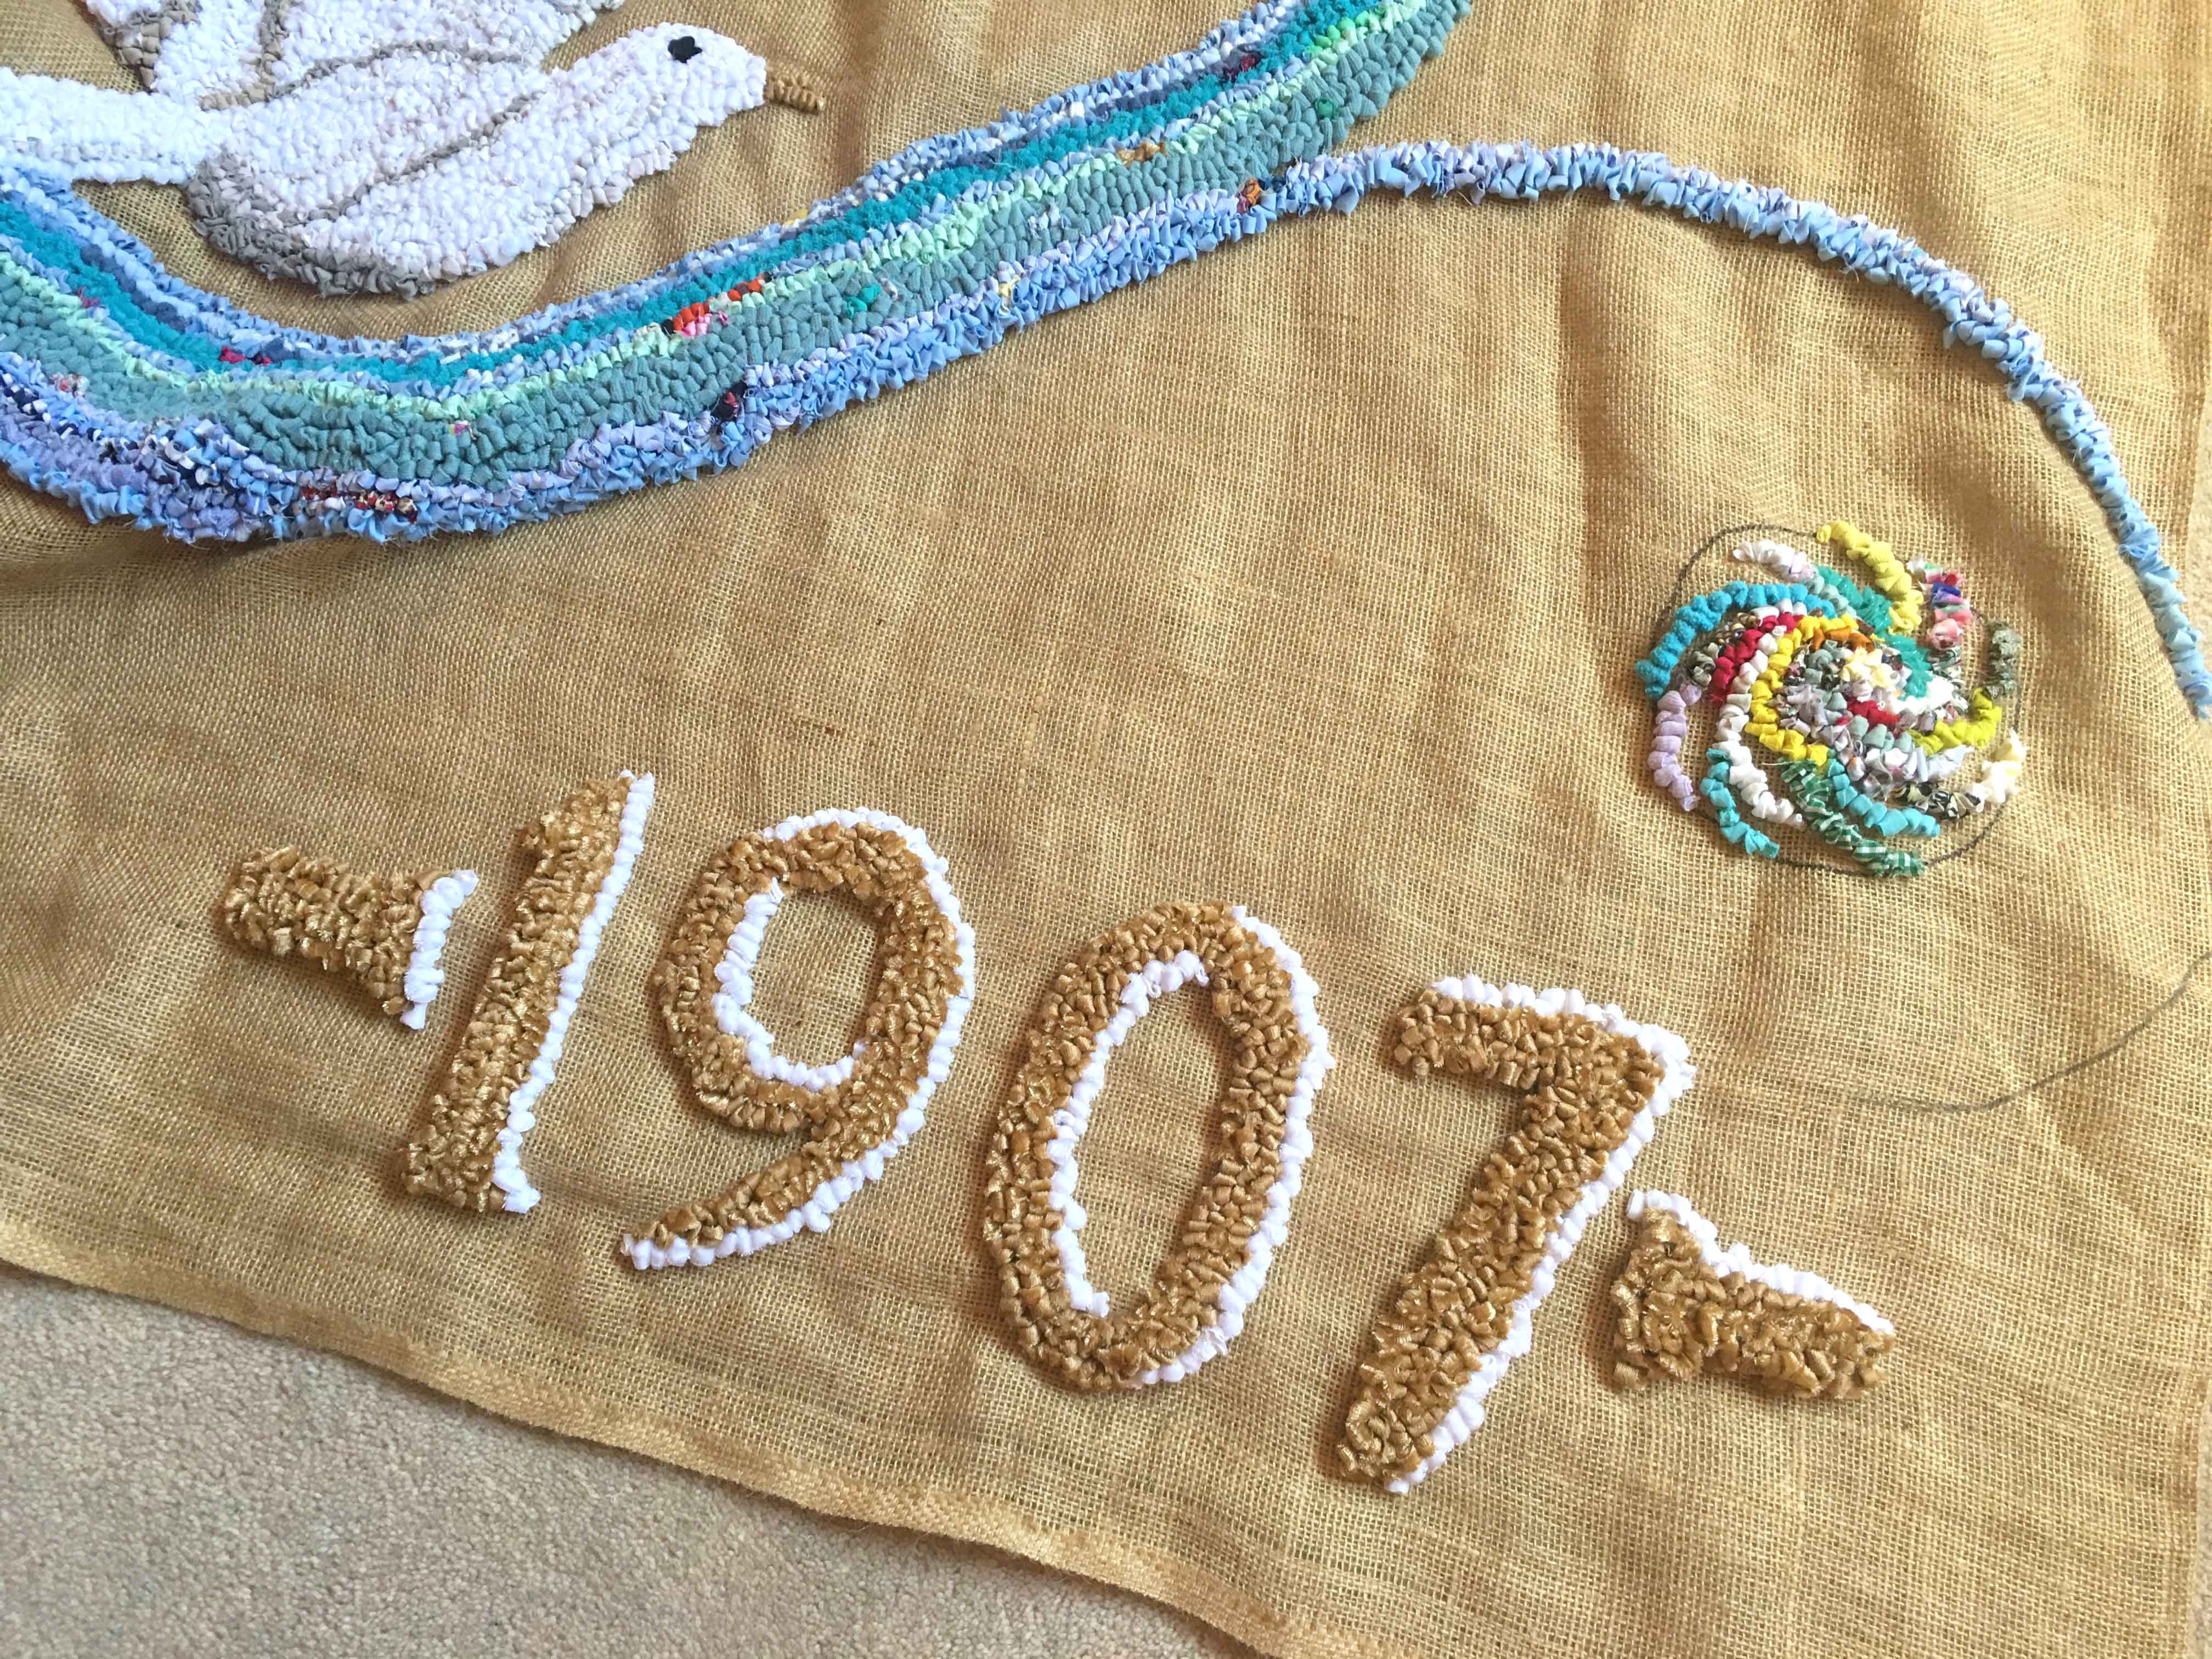 Rag rug numbers 1907 for the Settlement Commission in Letchworth